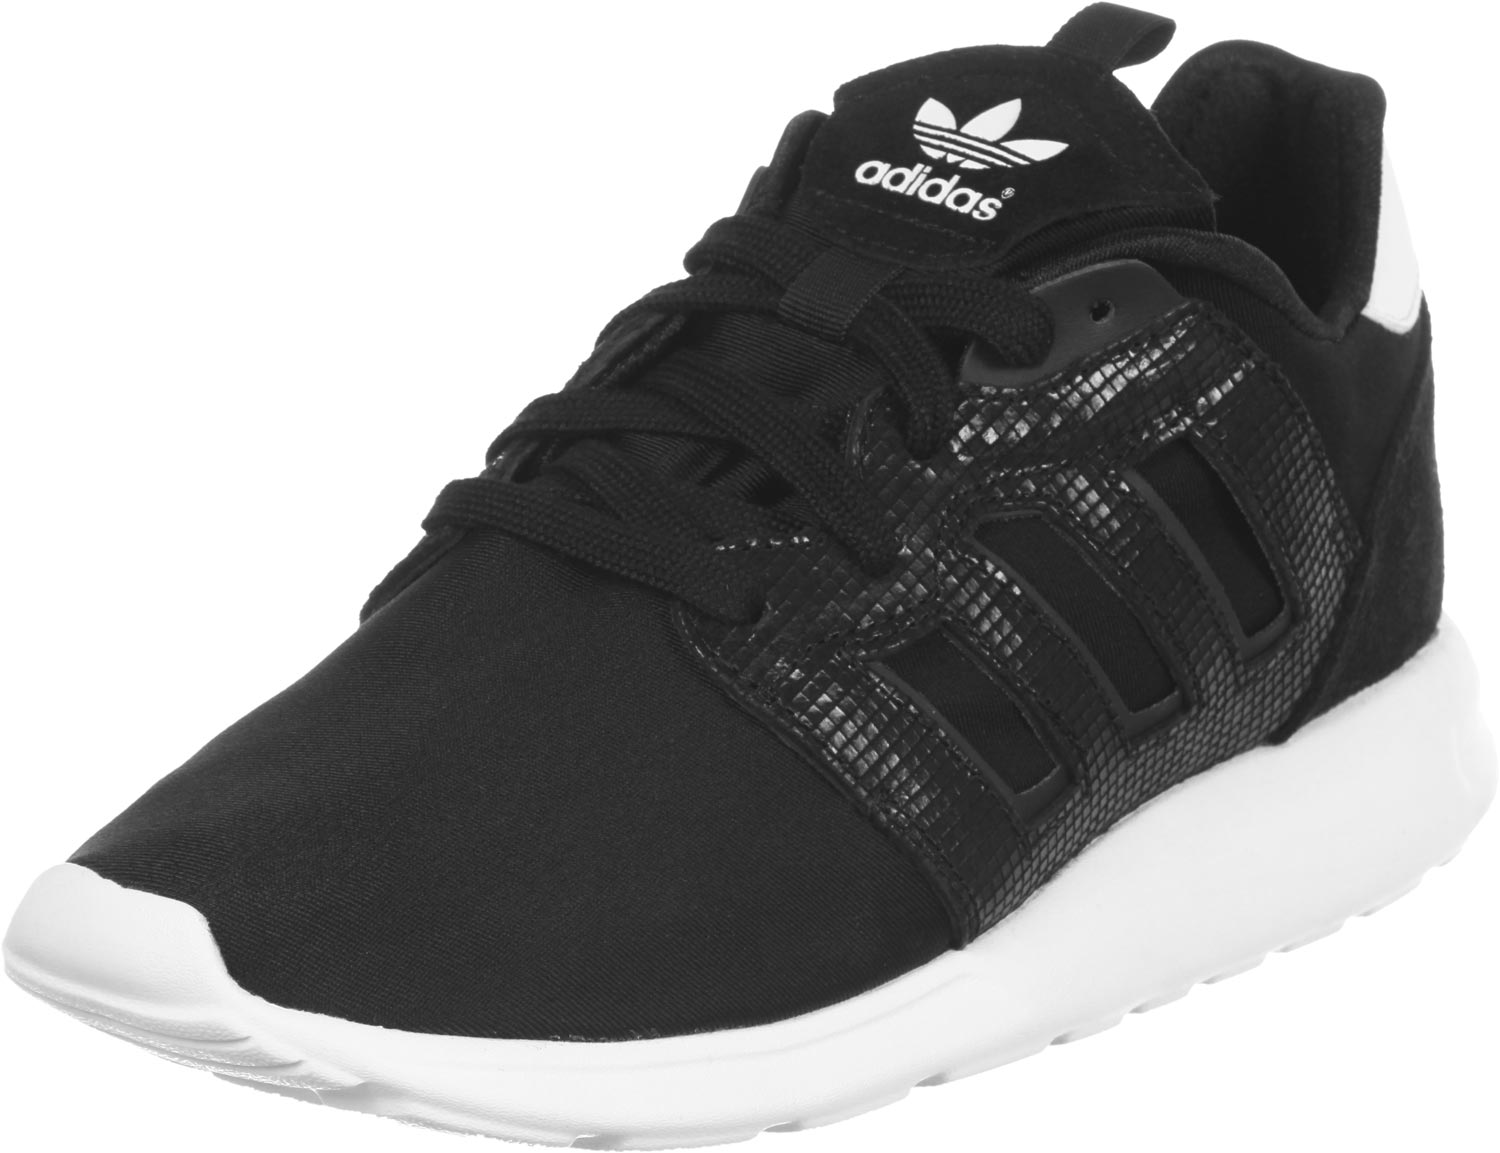 Adidas Zx 500 homme pas cher